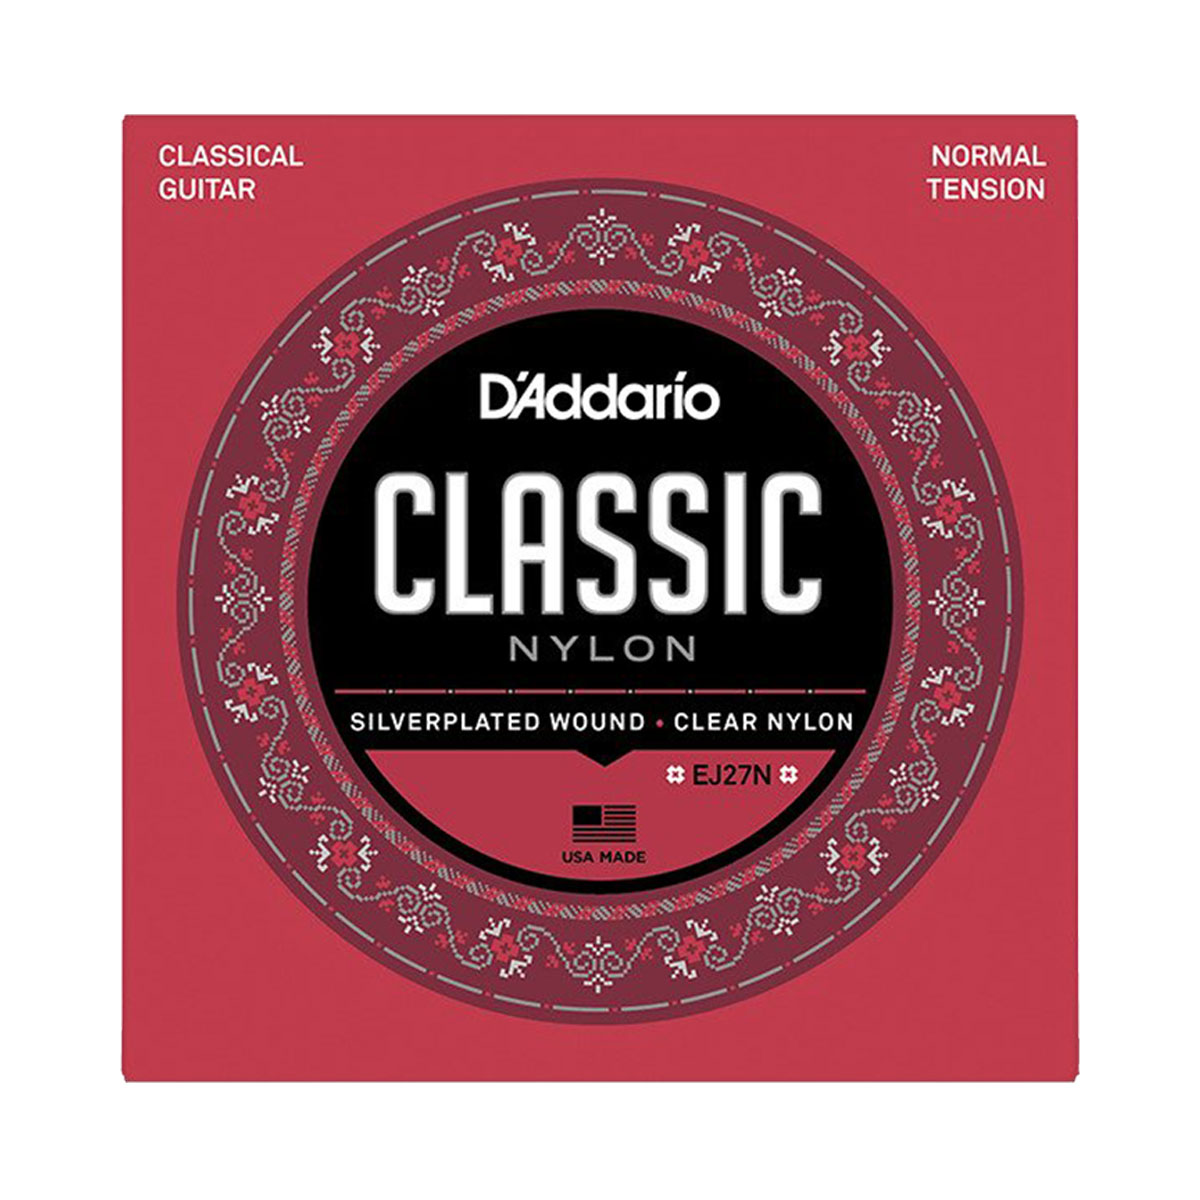 D'Addario Classic Guitar, Normal Tension, Silverplated Wound (Clear Nylon), EJ27N